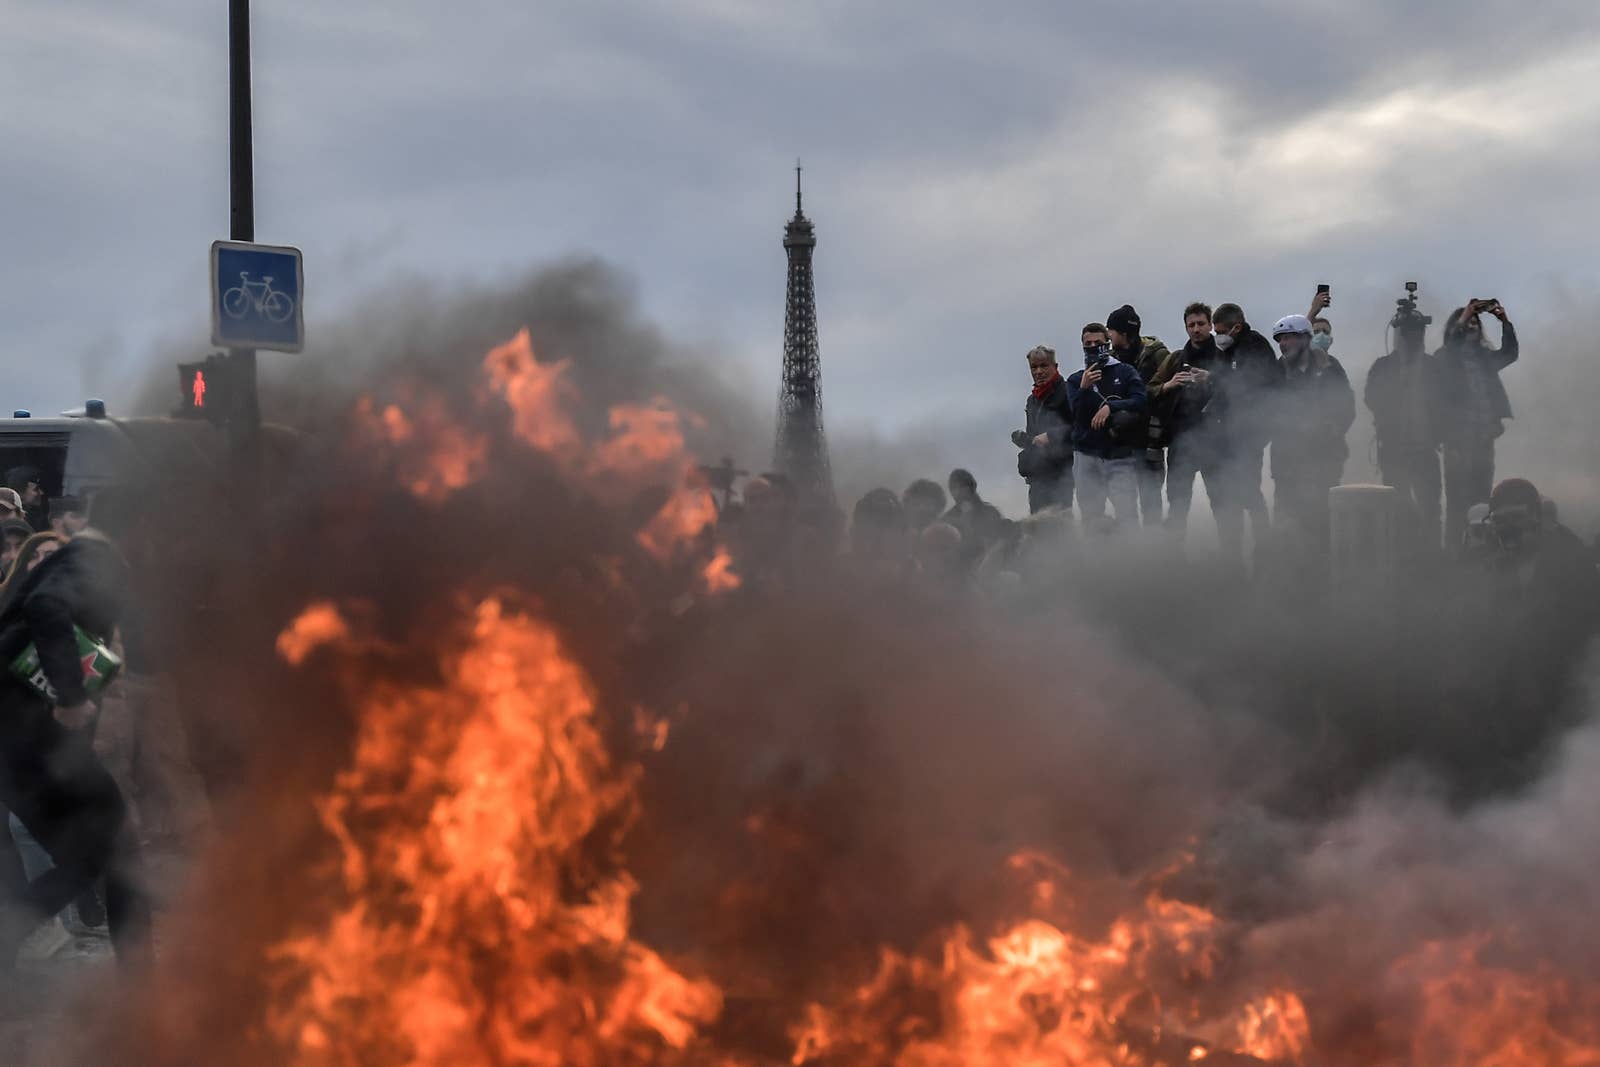 fire burns in the foreground as protesters stand on an elevated surface documenting the scene with the Eiffel Towerin the background